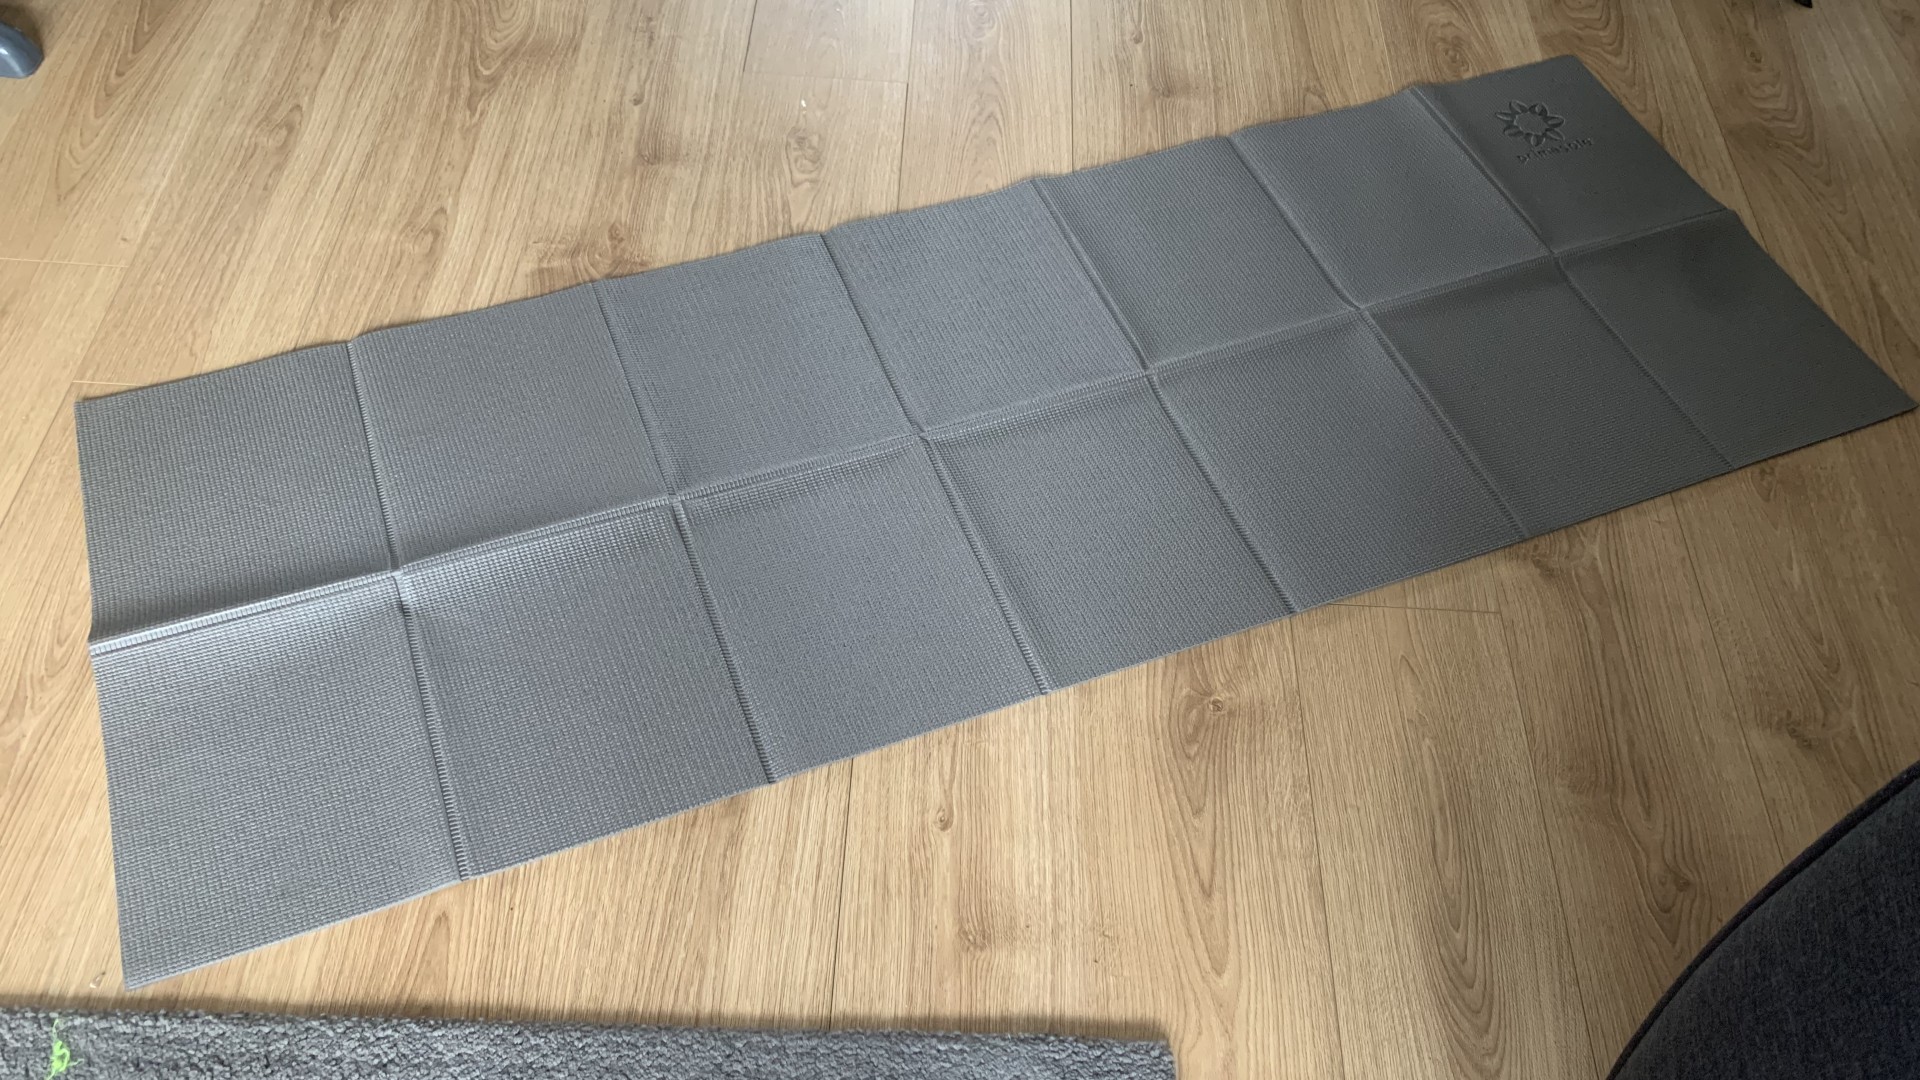 Primasole folding yoga mat unfolded and laid out for use